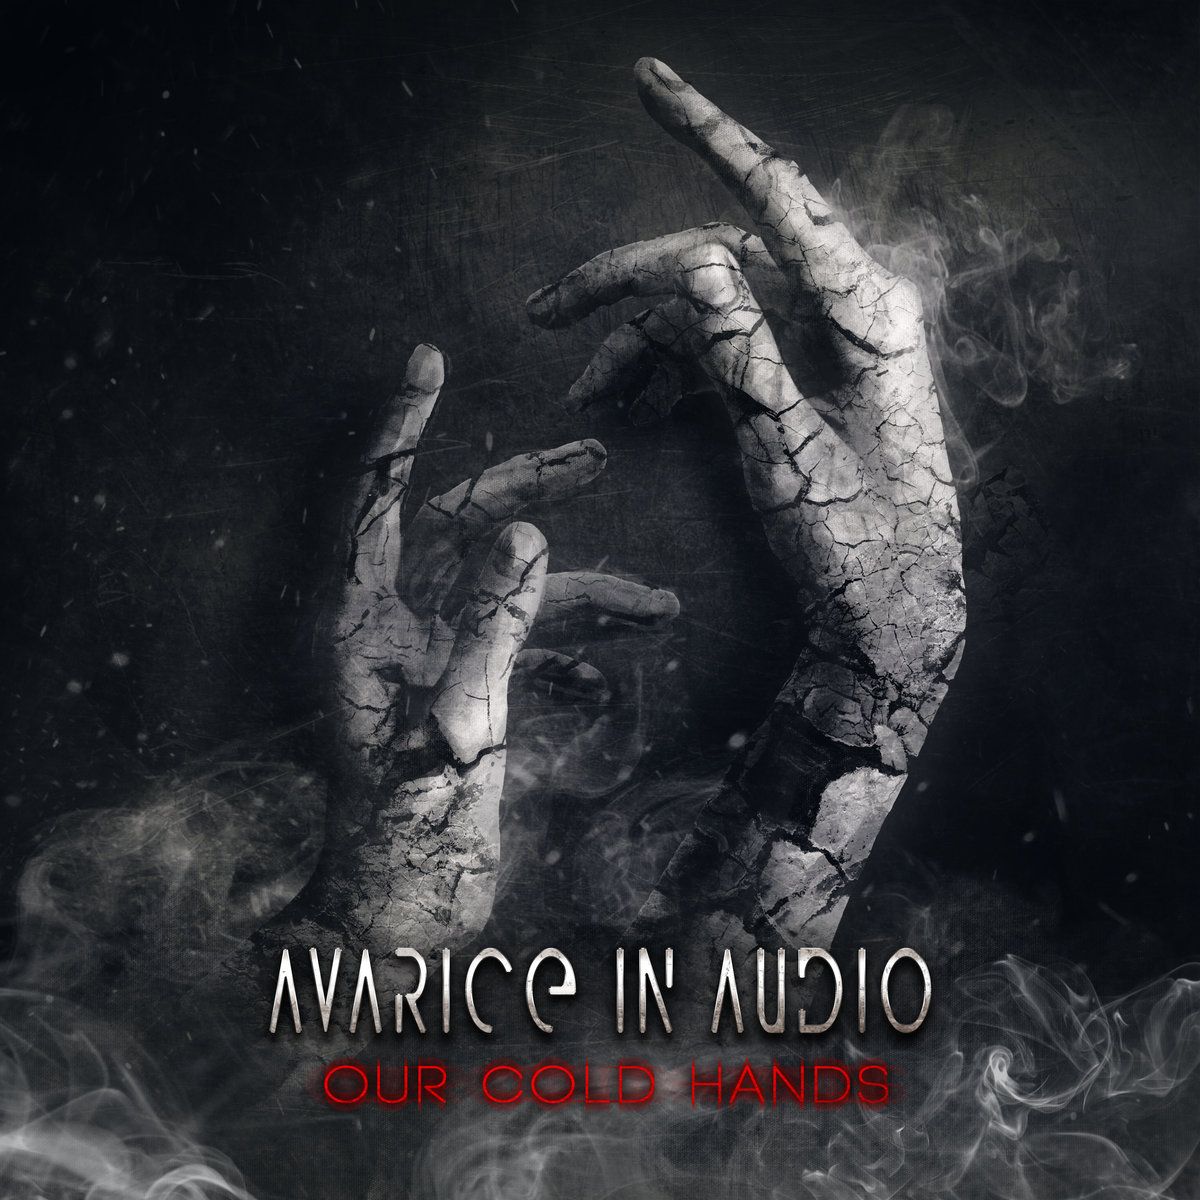 Avarice in Audio - Our Cold Hands (Benjamin�s Plague remix)